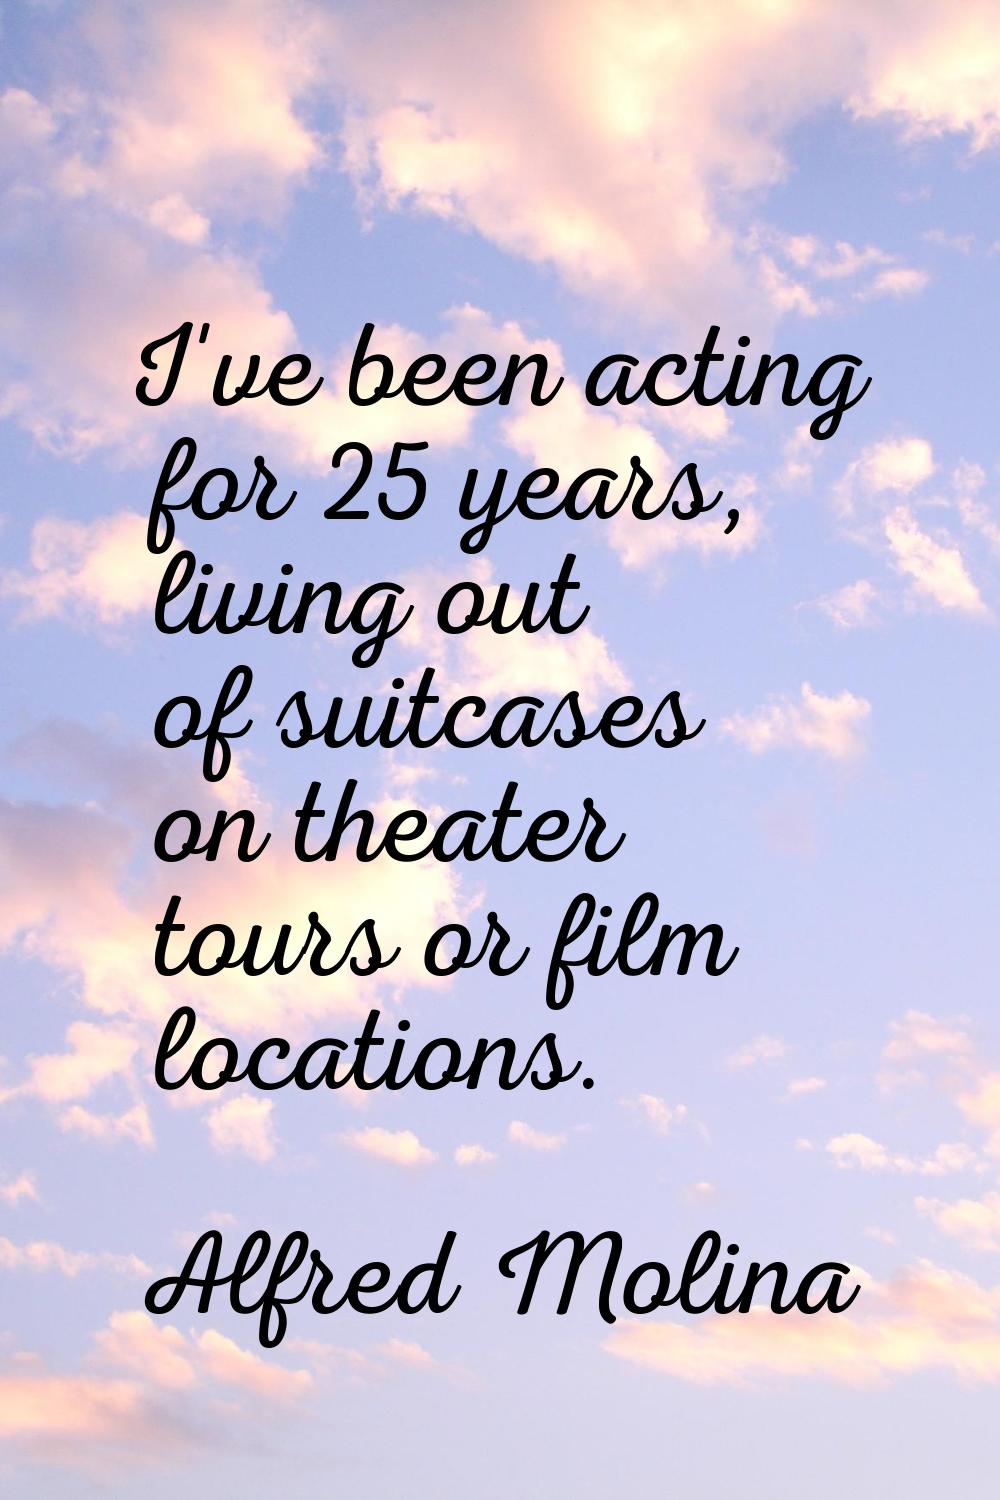 I've been acting for 25 years, living out of suitcases on theater tours or film locations.